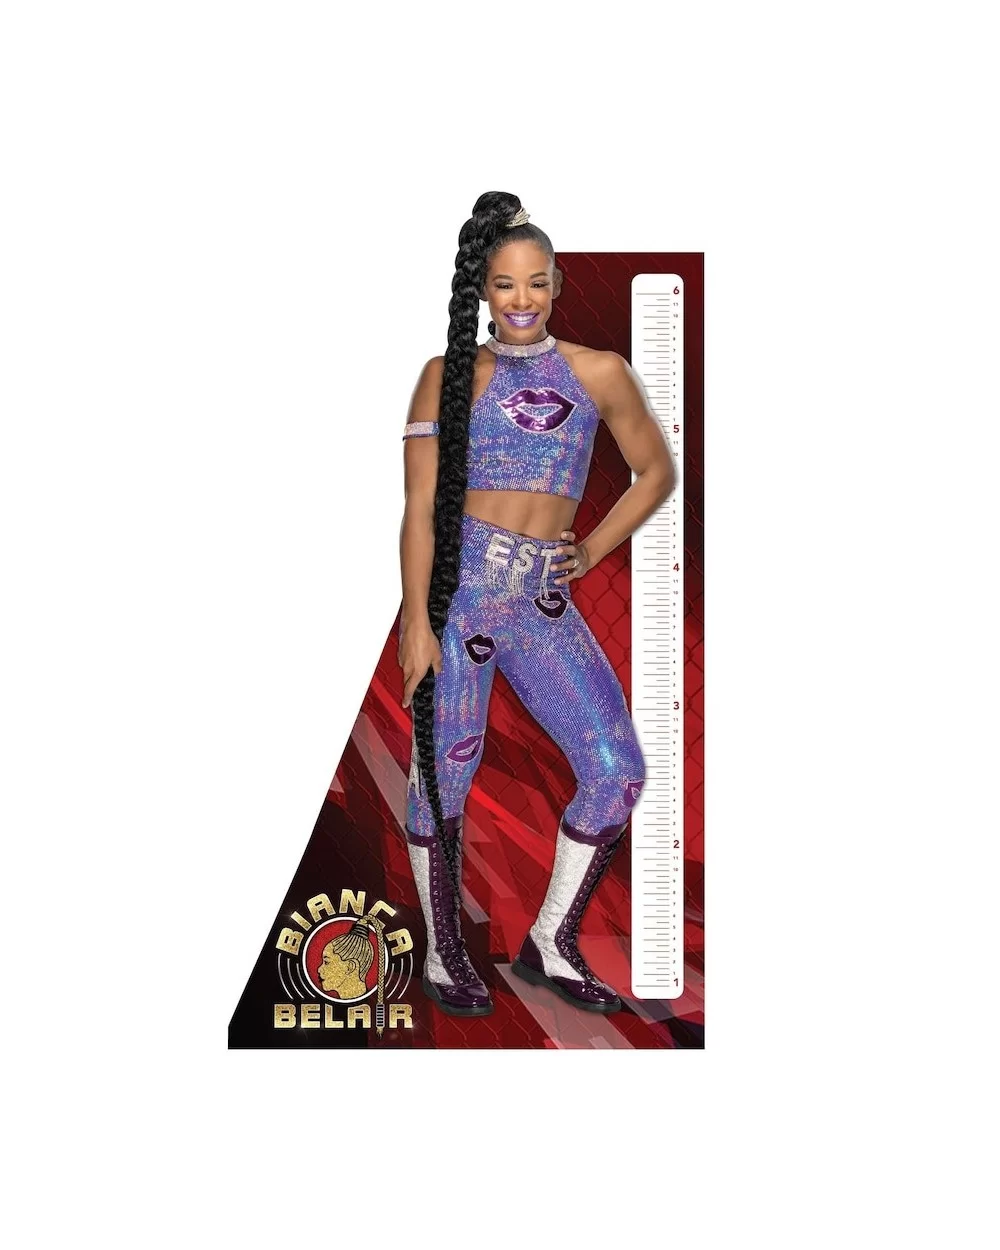 Fathead Bianca Belair Removable Growth Chart Decal $30.36 Home & Office